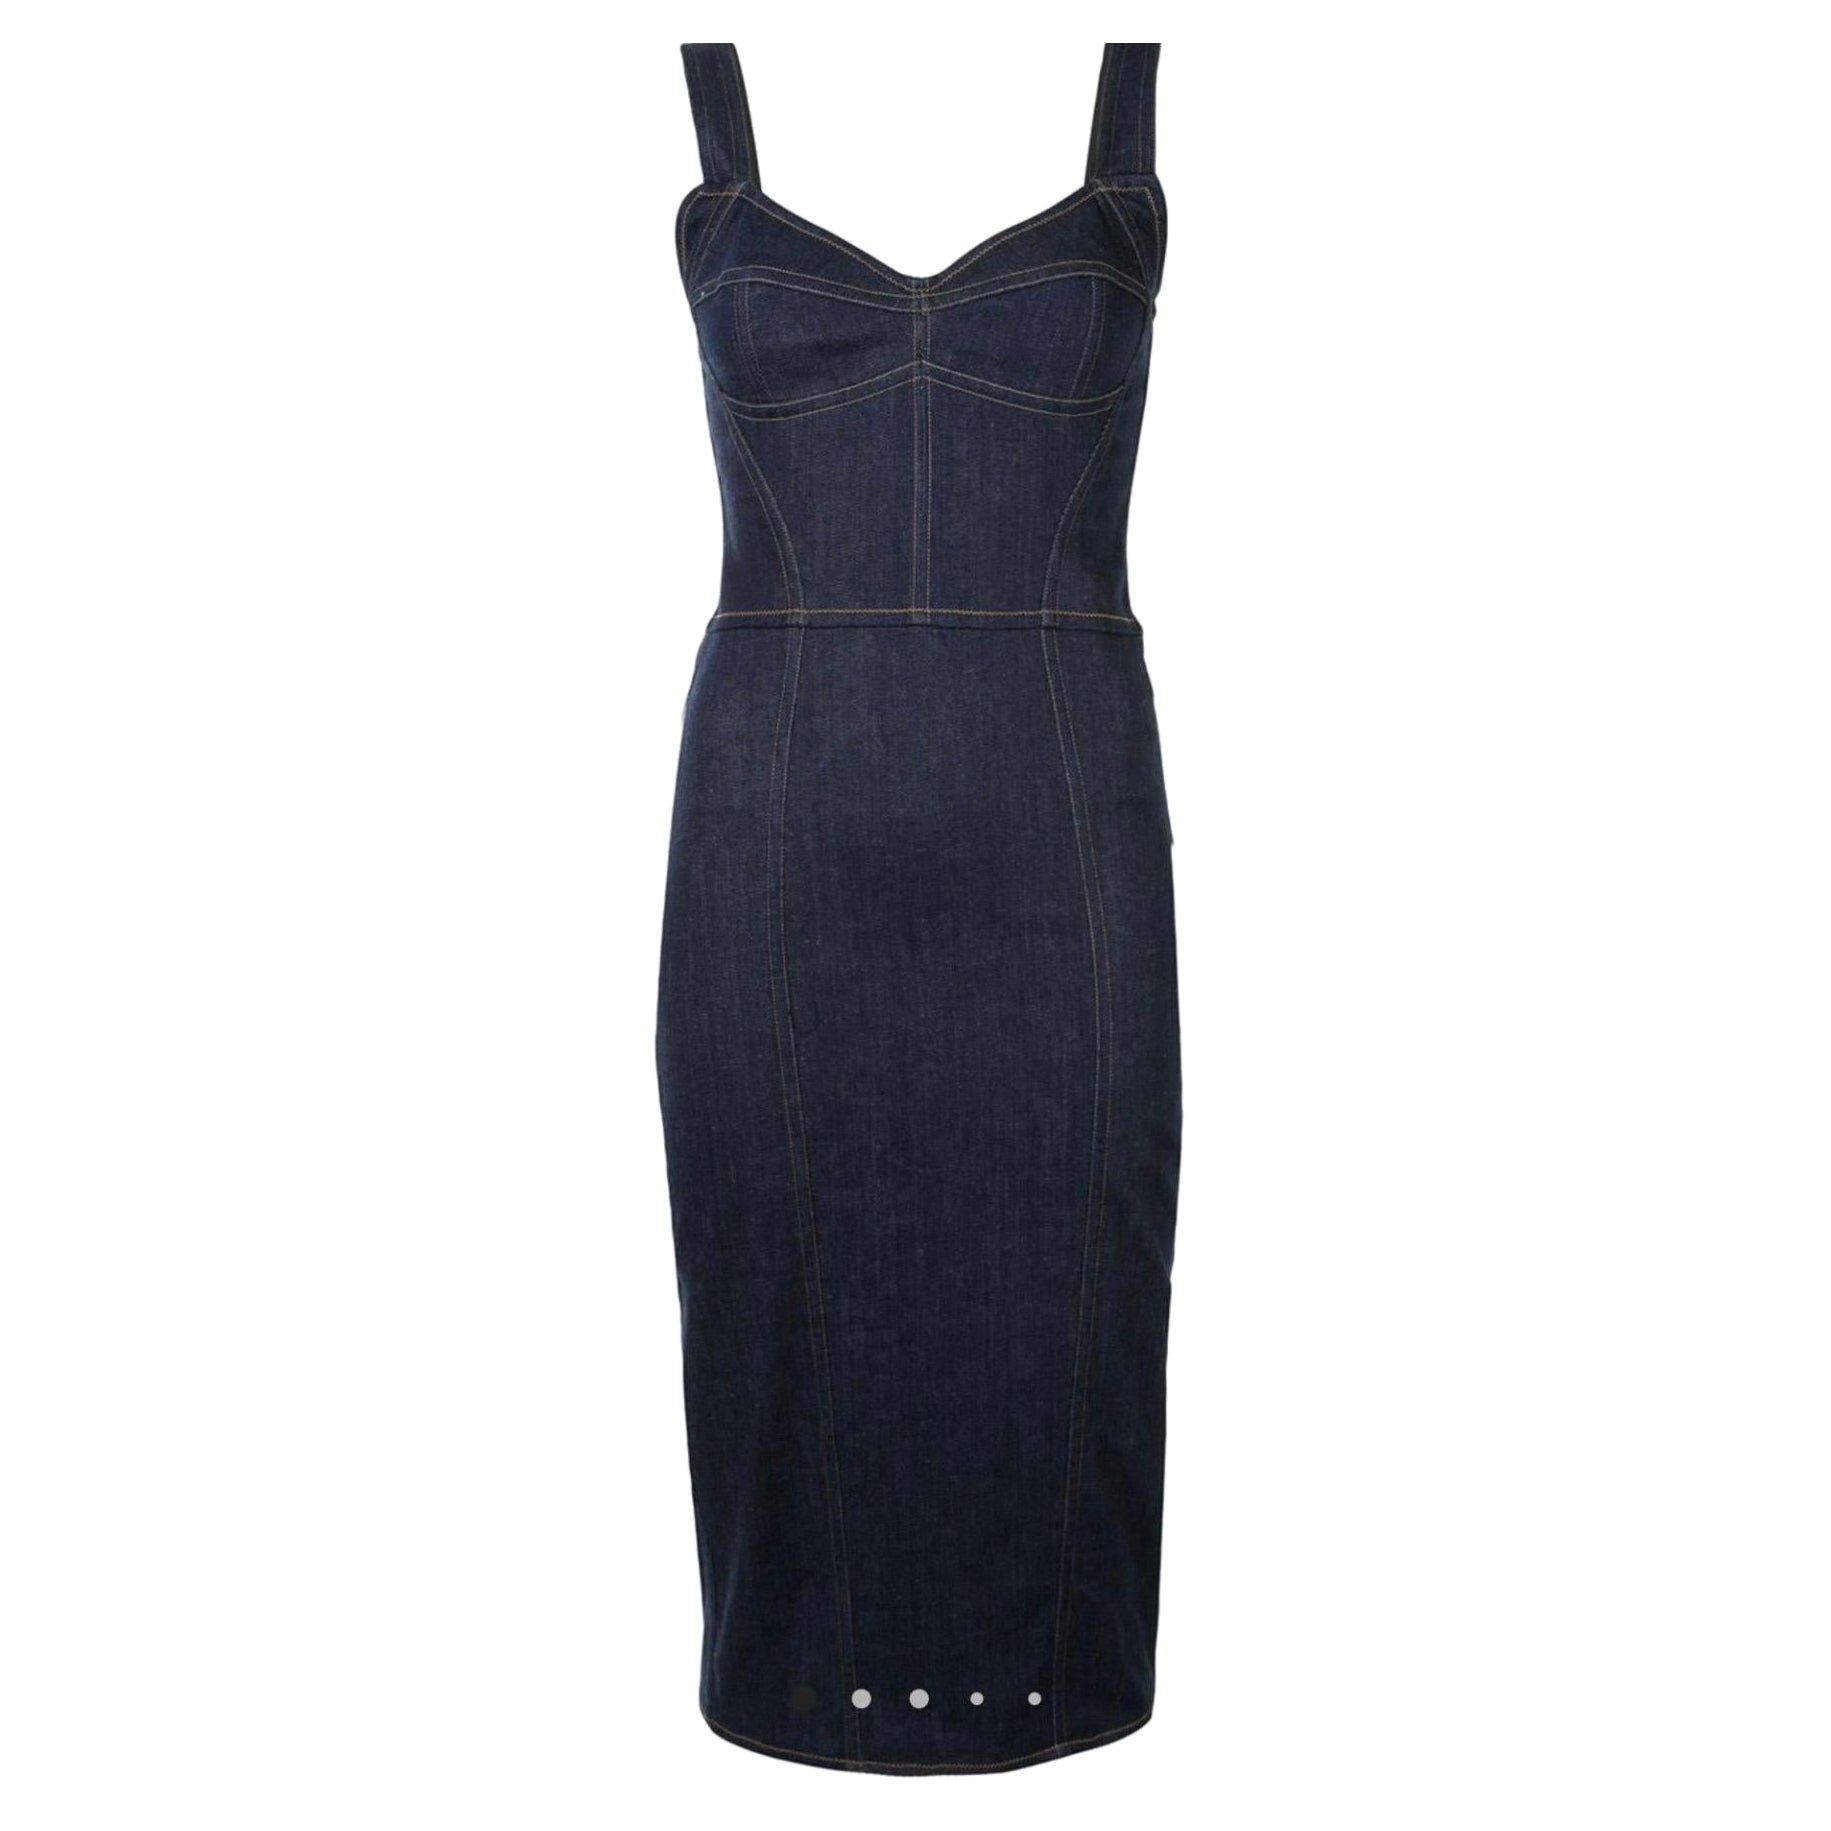 Dolce & Gabbana fitted dark blue denim casual dress features v-neck For Sale